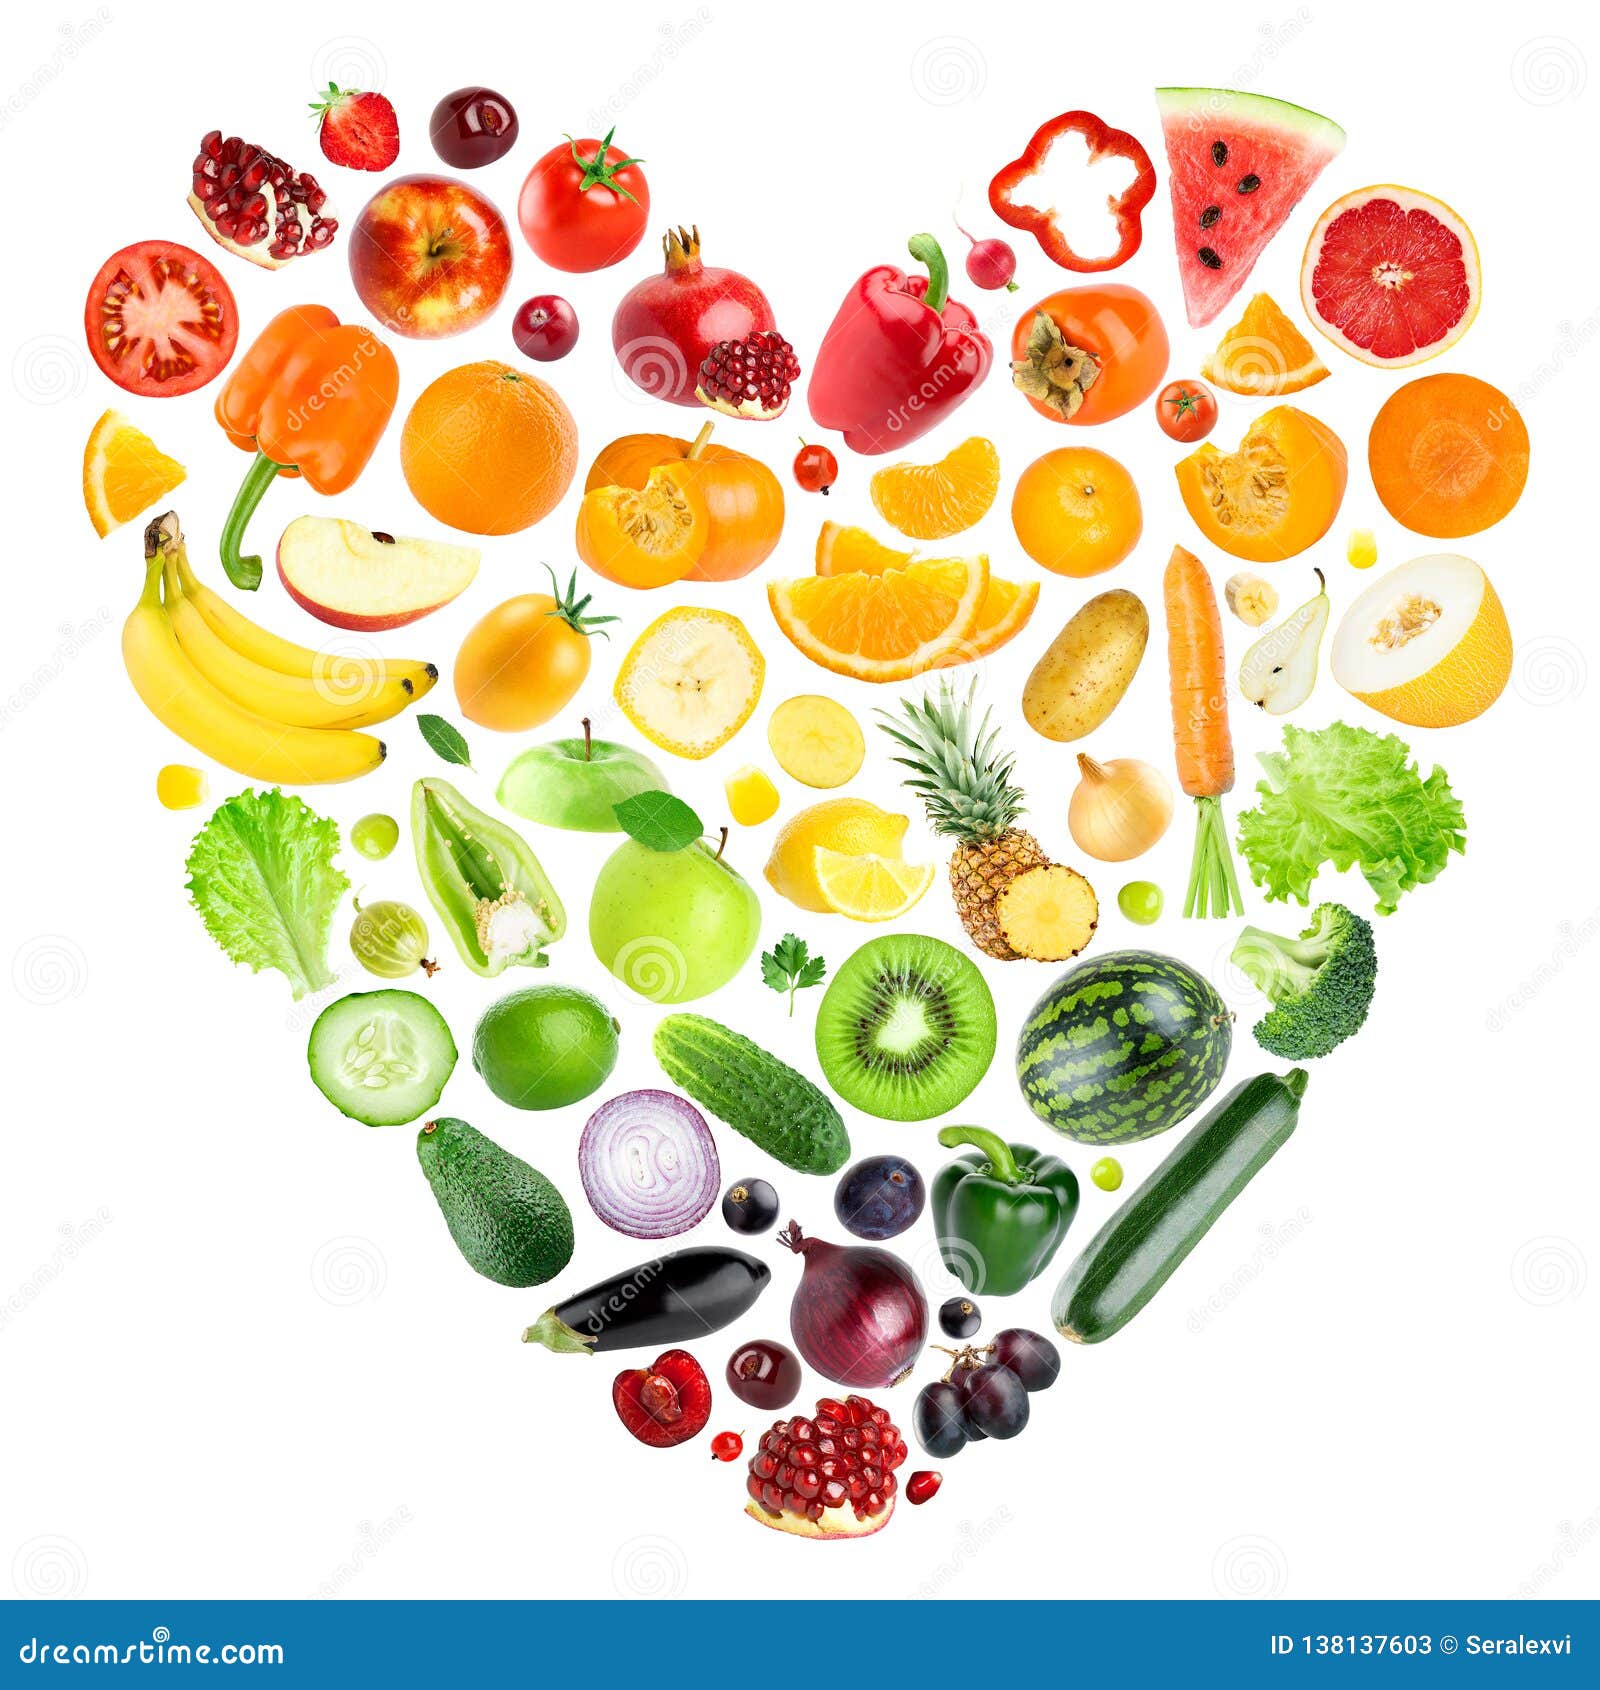 Heart Of Color Fruits And Vegetables Stock Image Image Of Grape